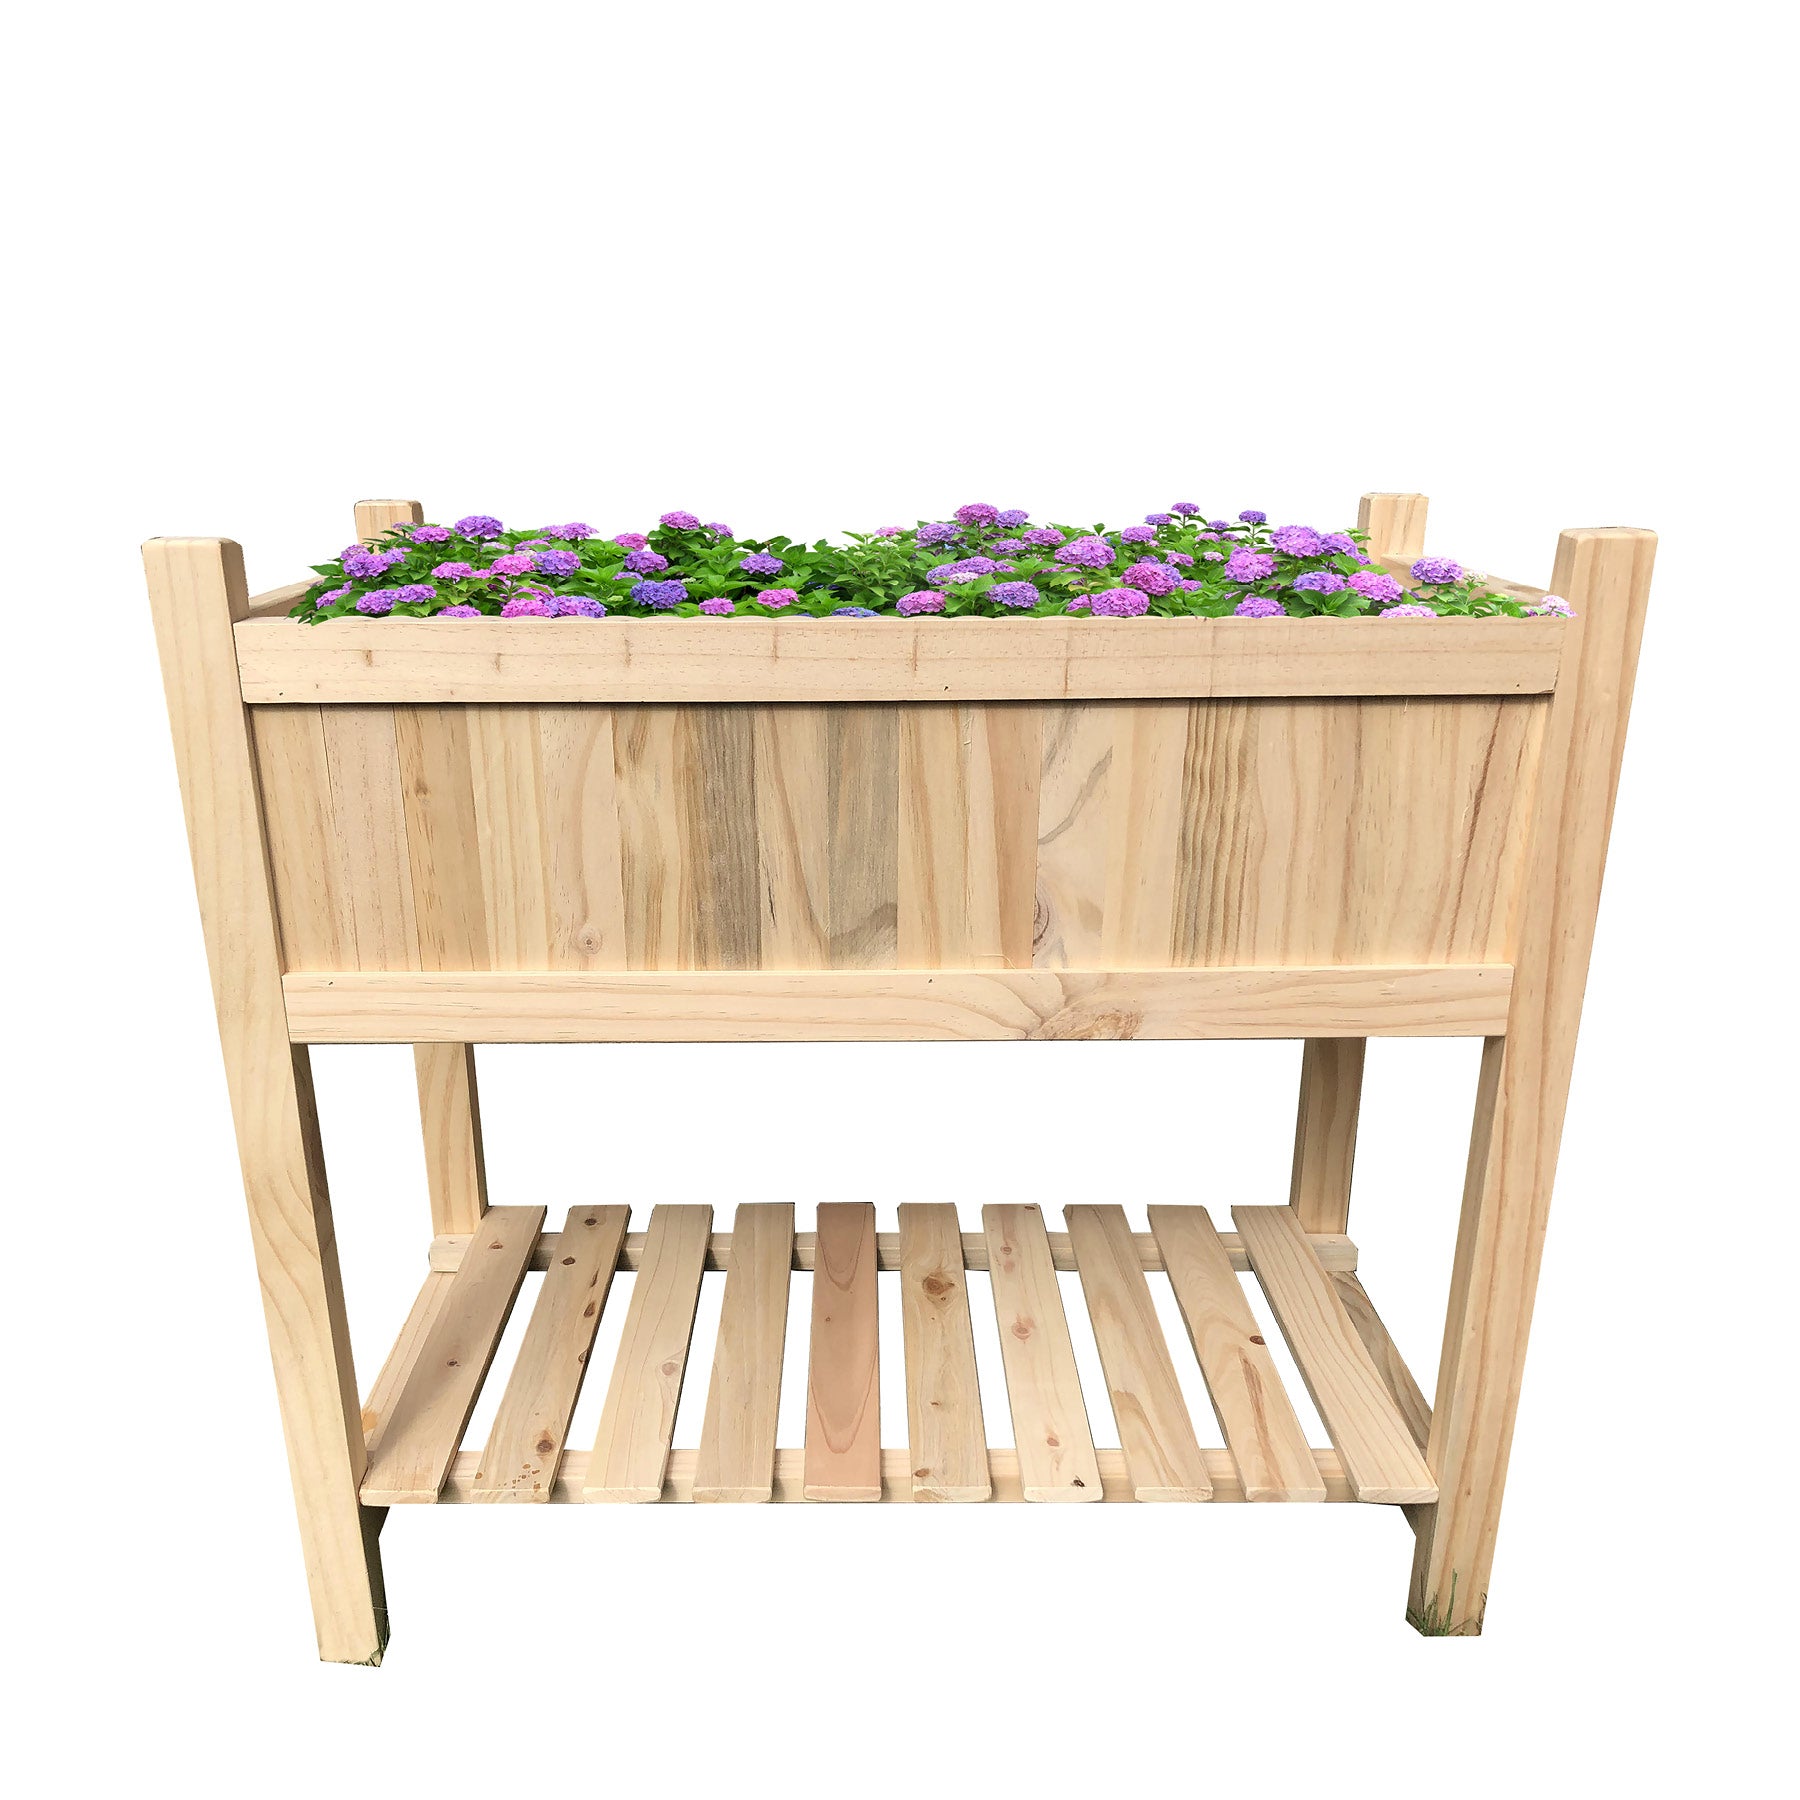 Replacement parts for Wooden Raised Gardening Bed 914895